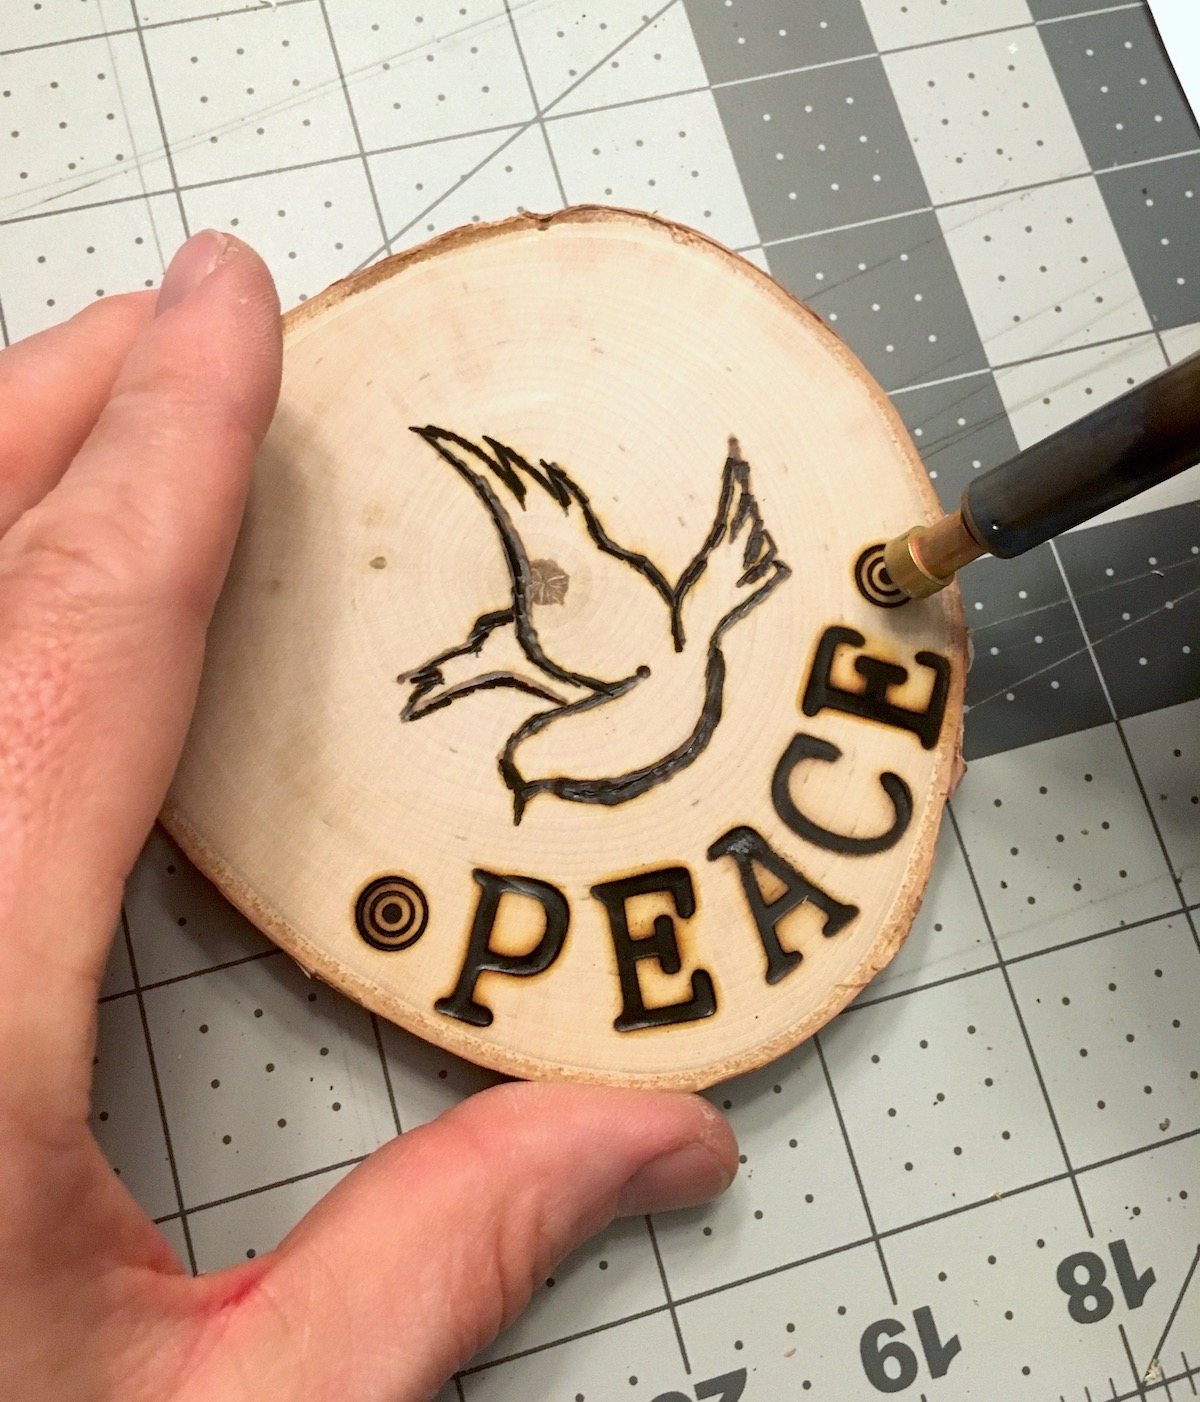 Using a wood burning tool on a wood slice